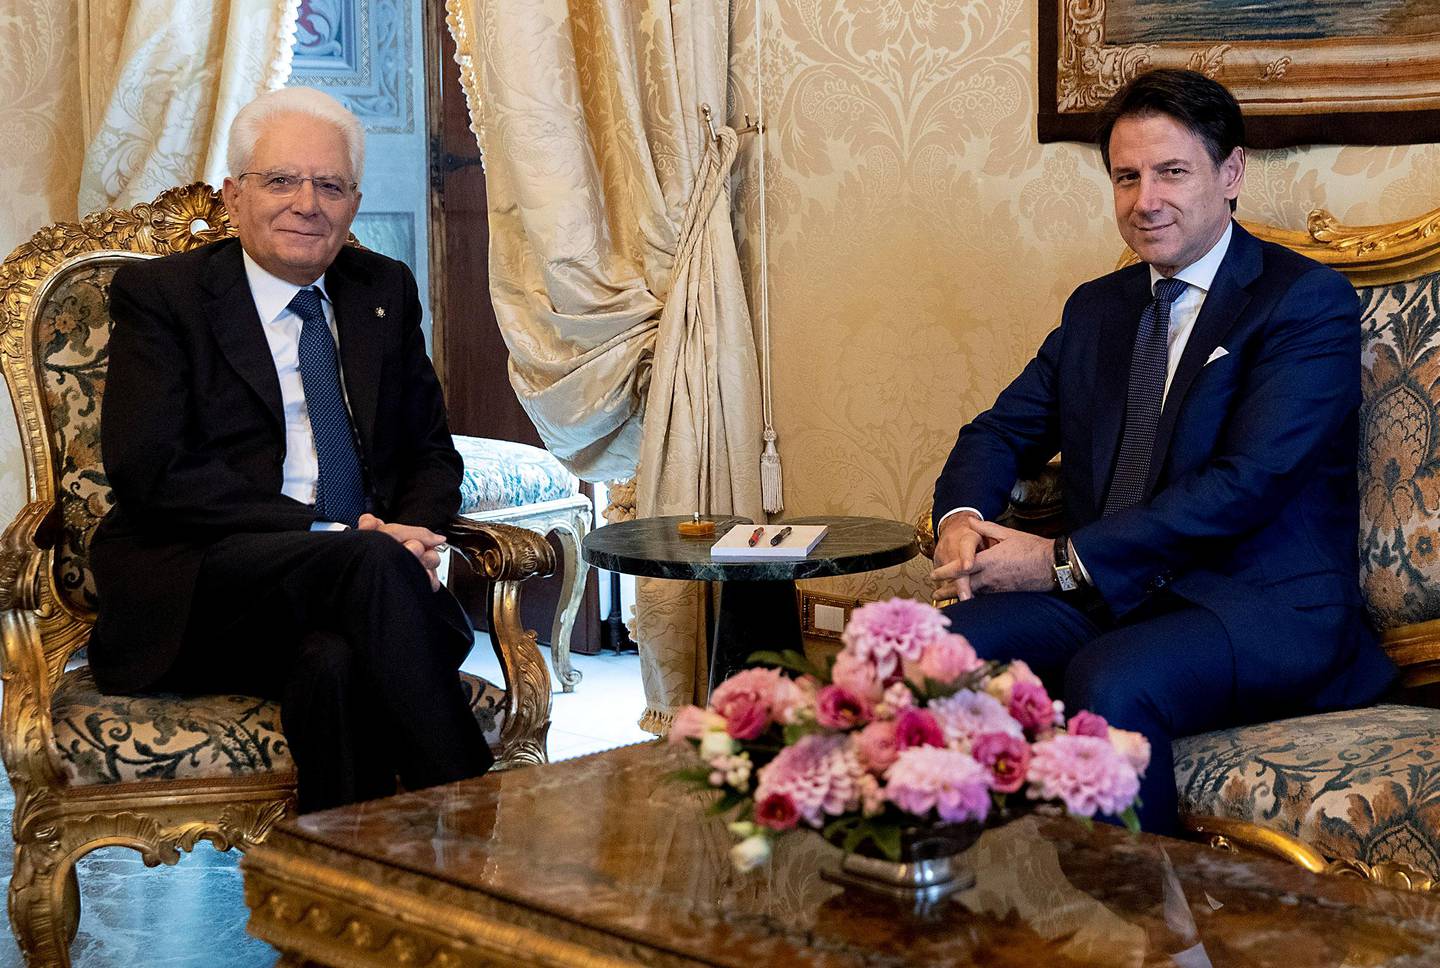 Italy's President Sergio Mattarella meets Prime Minister Giuseppe Conte in Rome, Italy August 29, 2019. Presidential Palace/Paolo Giandotti/Handout via REUTERS ATTENTION EDITORS - THIS IMAGE HAS BEEN SUPPLIED BY A THIRD PARTY. NO RESALES. NO ARCHIVES. REFILE - REMOVING ERRONEOUS INFORMATION